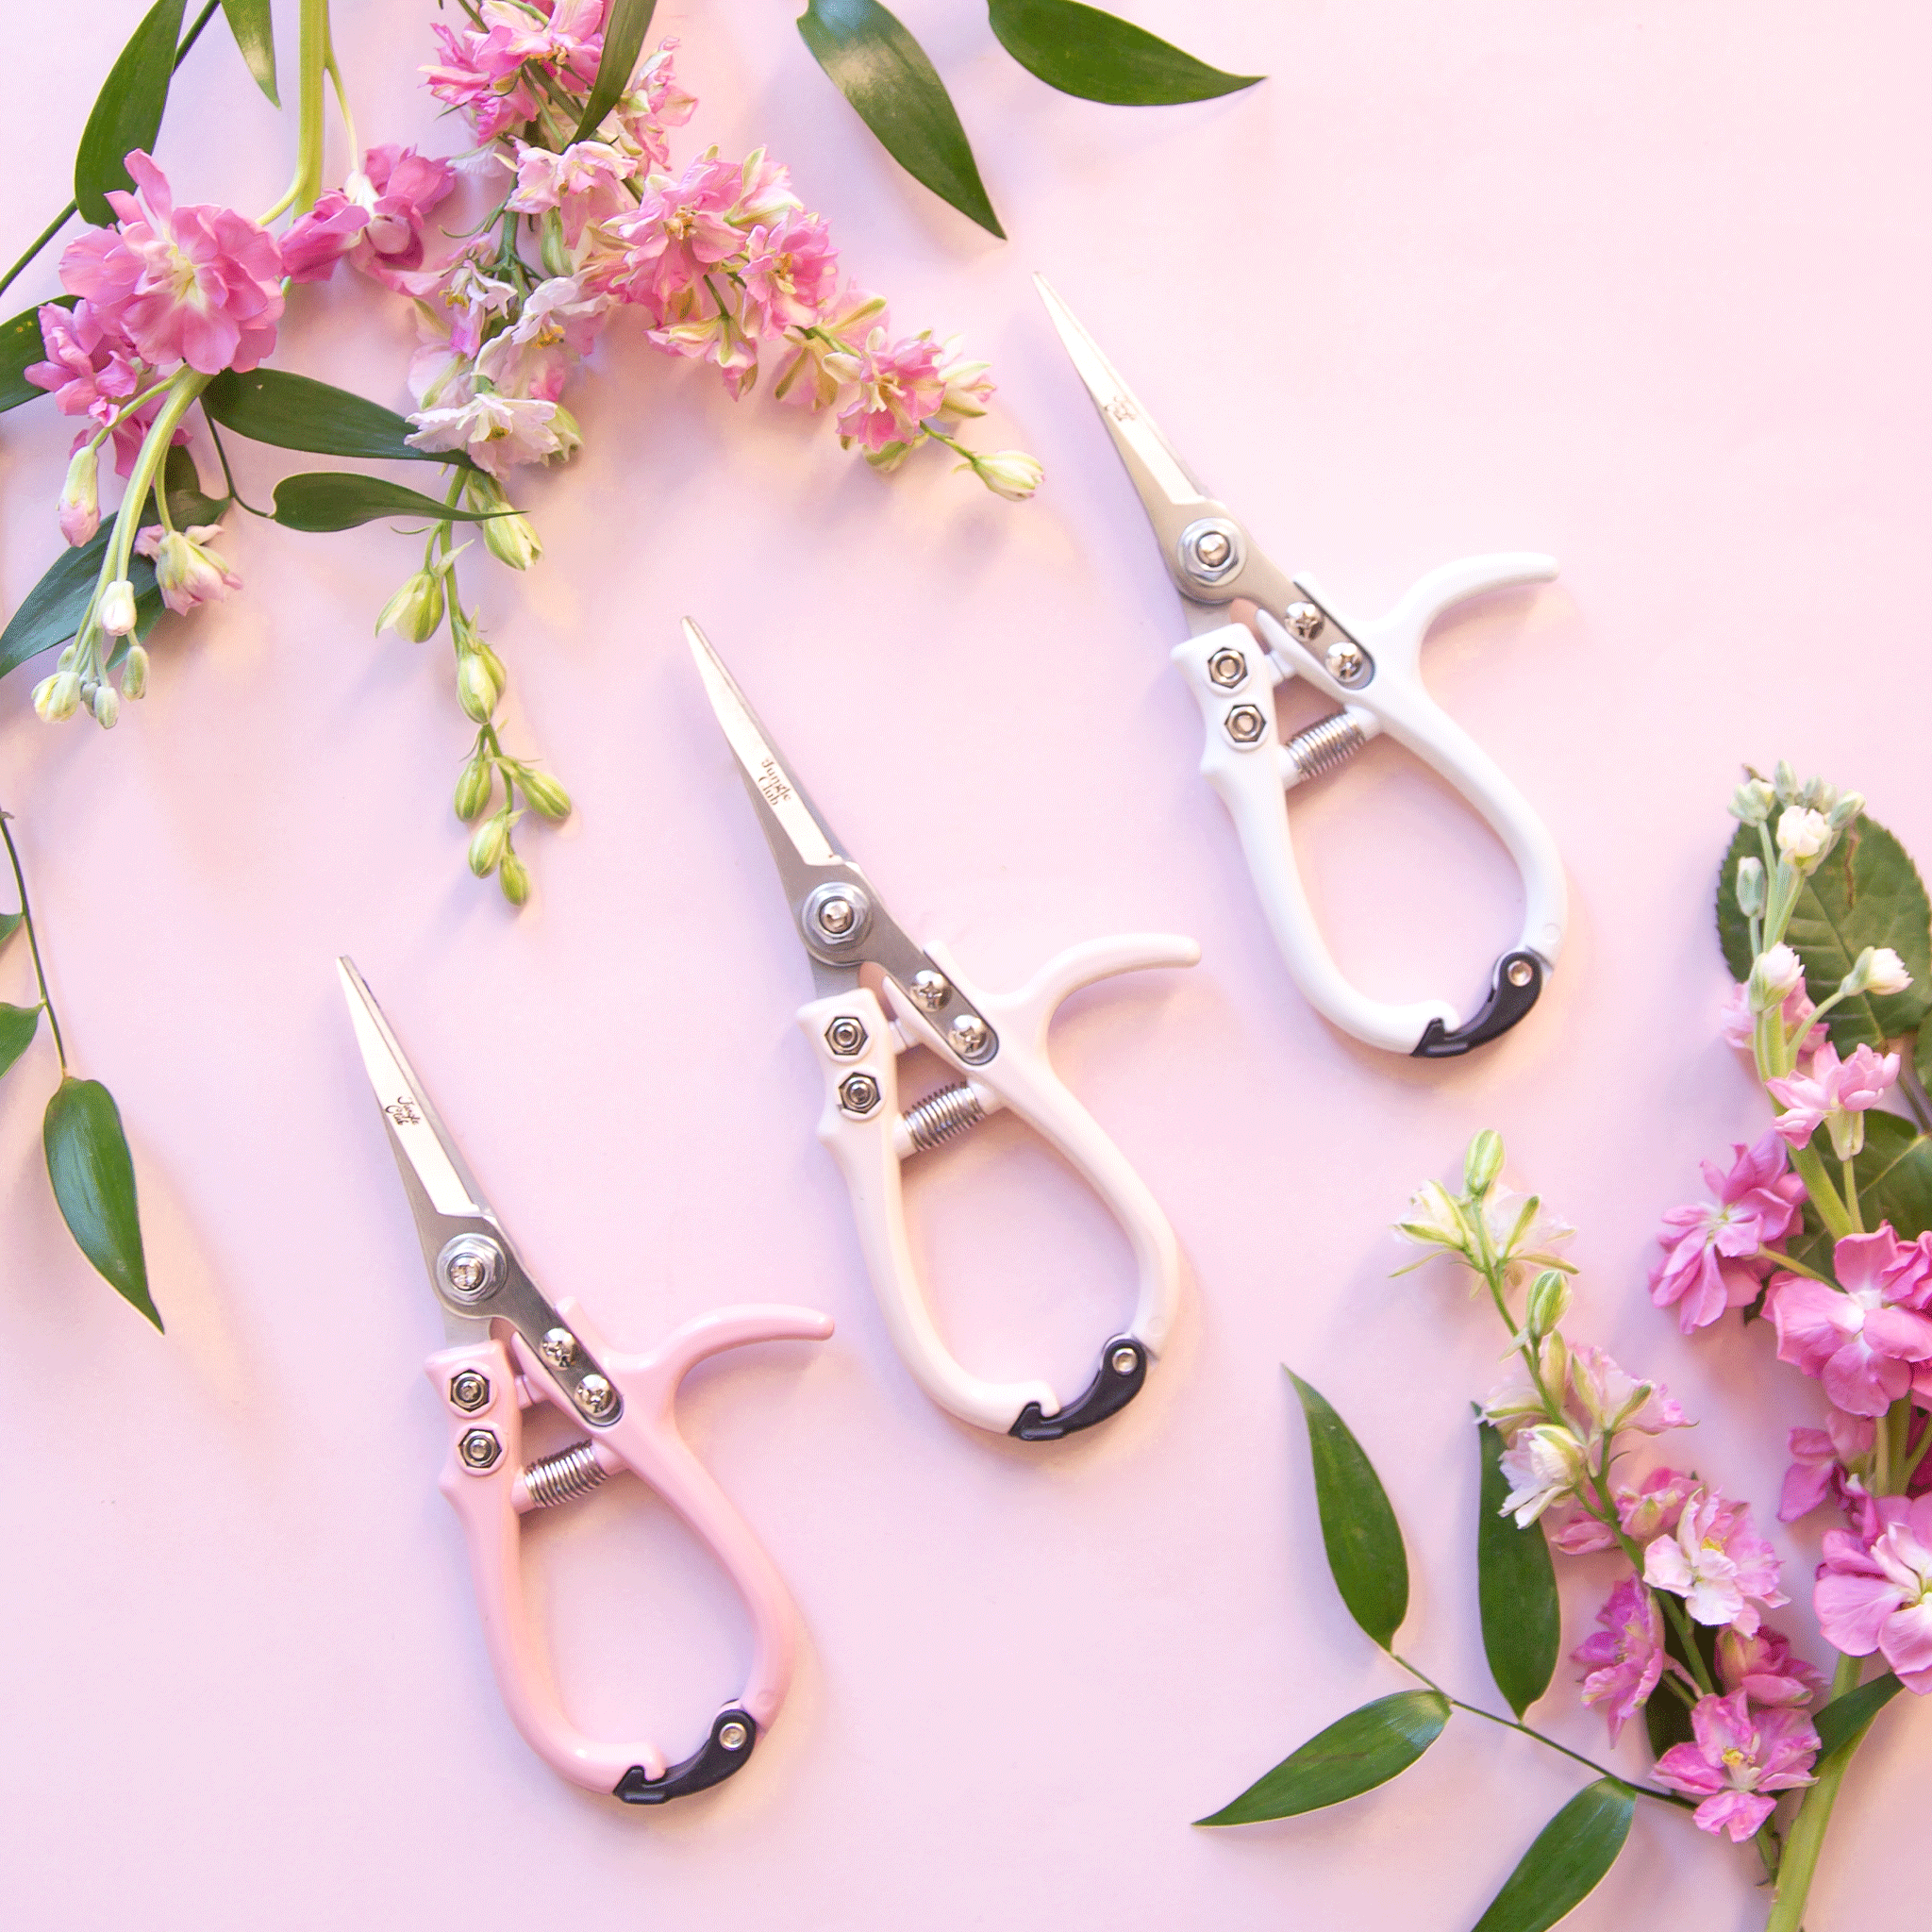 On a pink background is the three color ways of pruning shears next to bouquets of flowers.